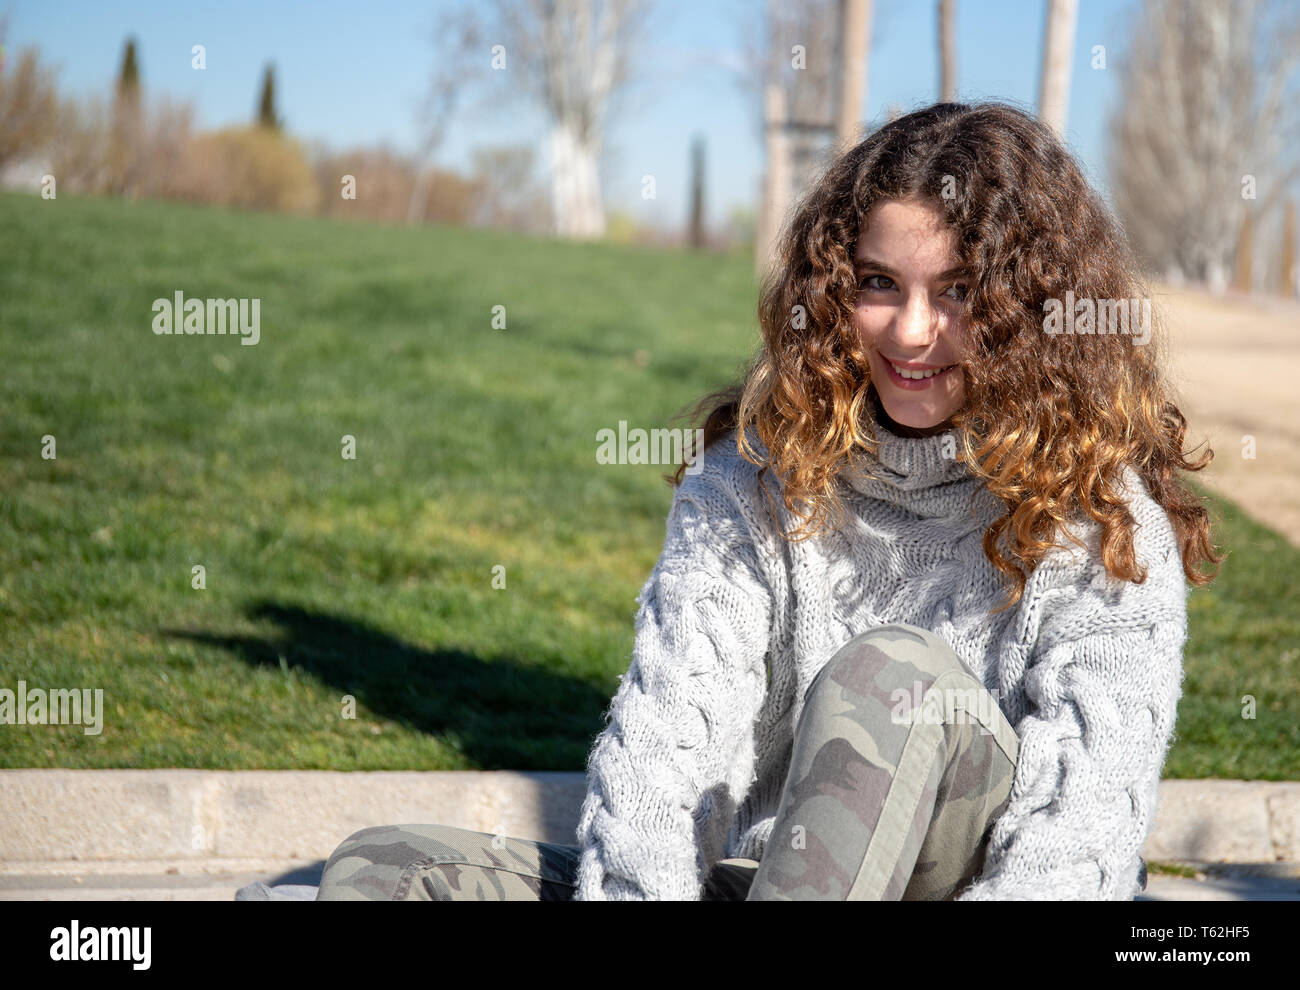 Portrait of a pre-adolescent girl posing in a public park on a sunny spring day Stock Photo